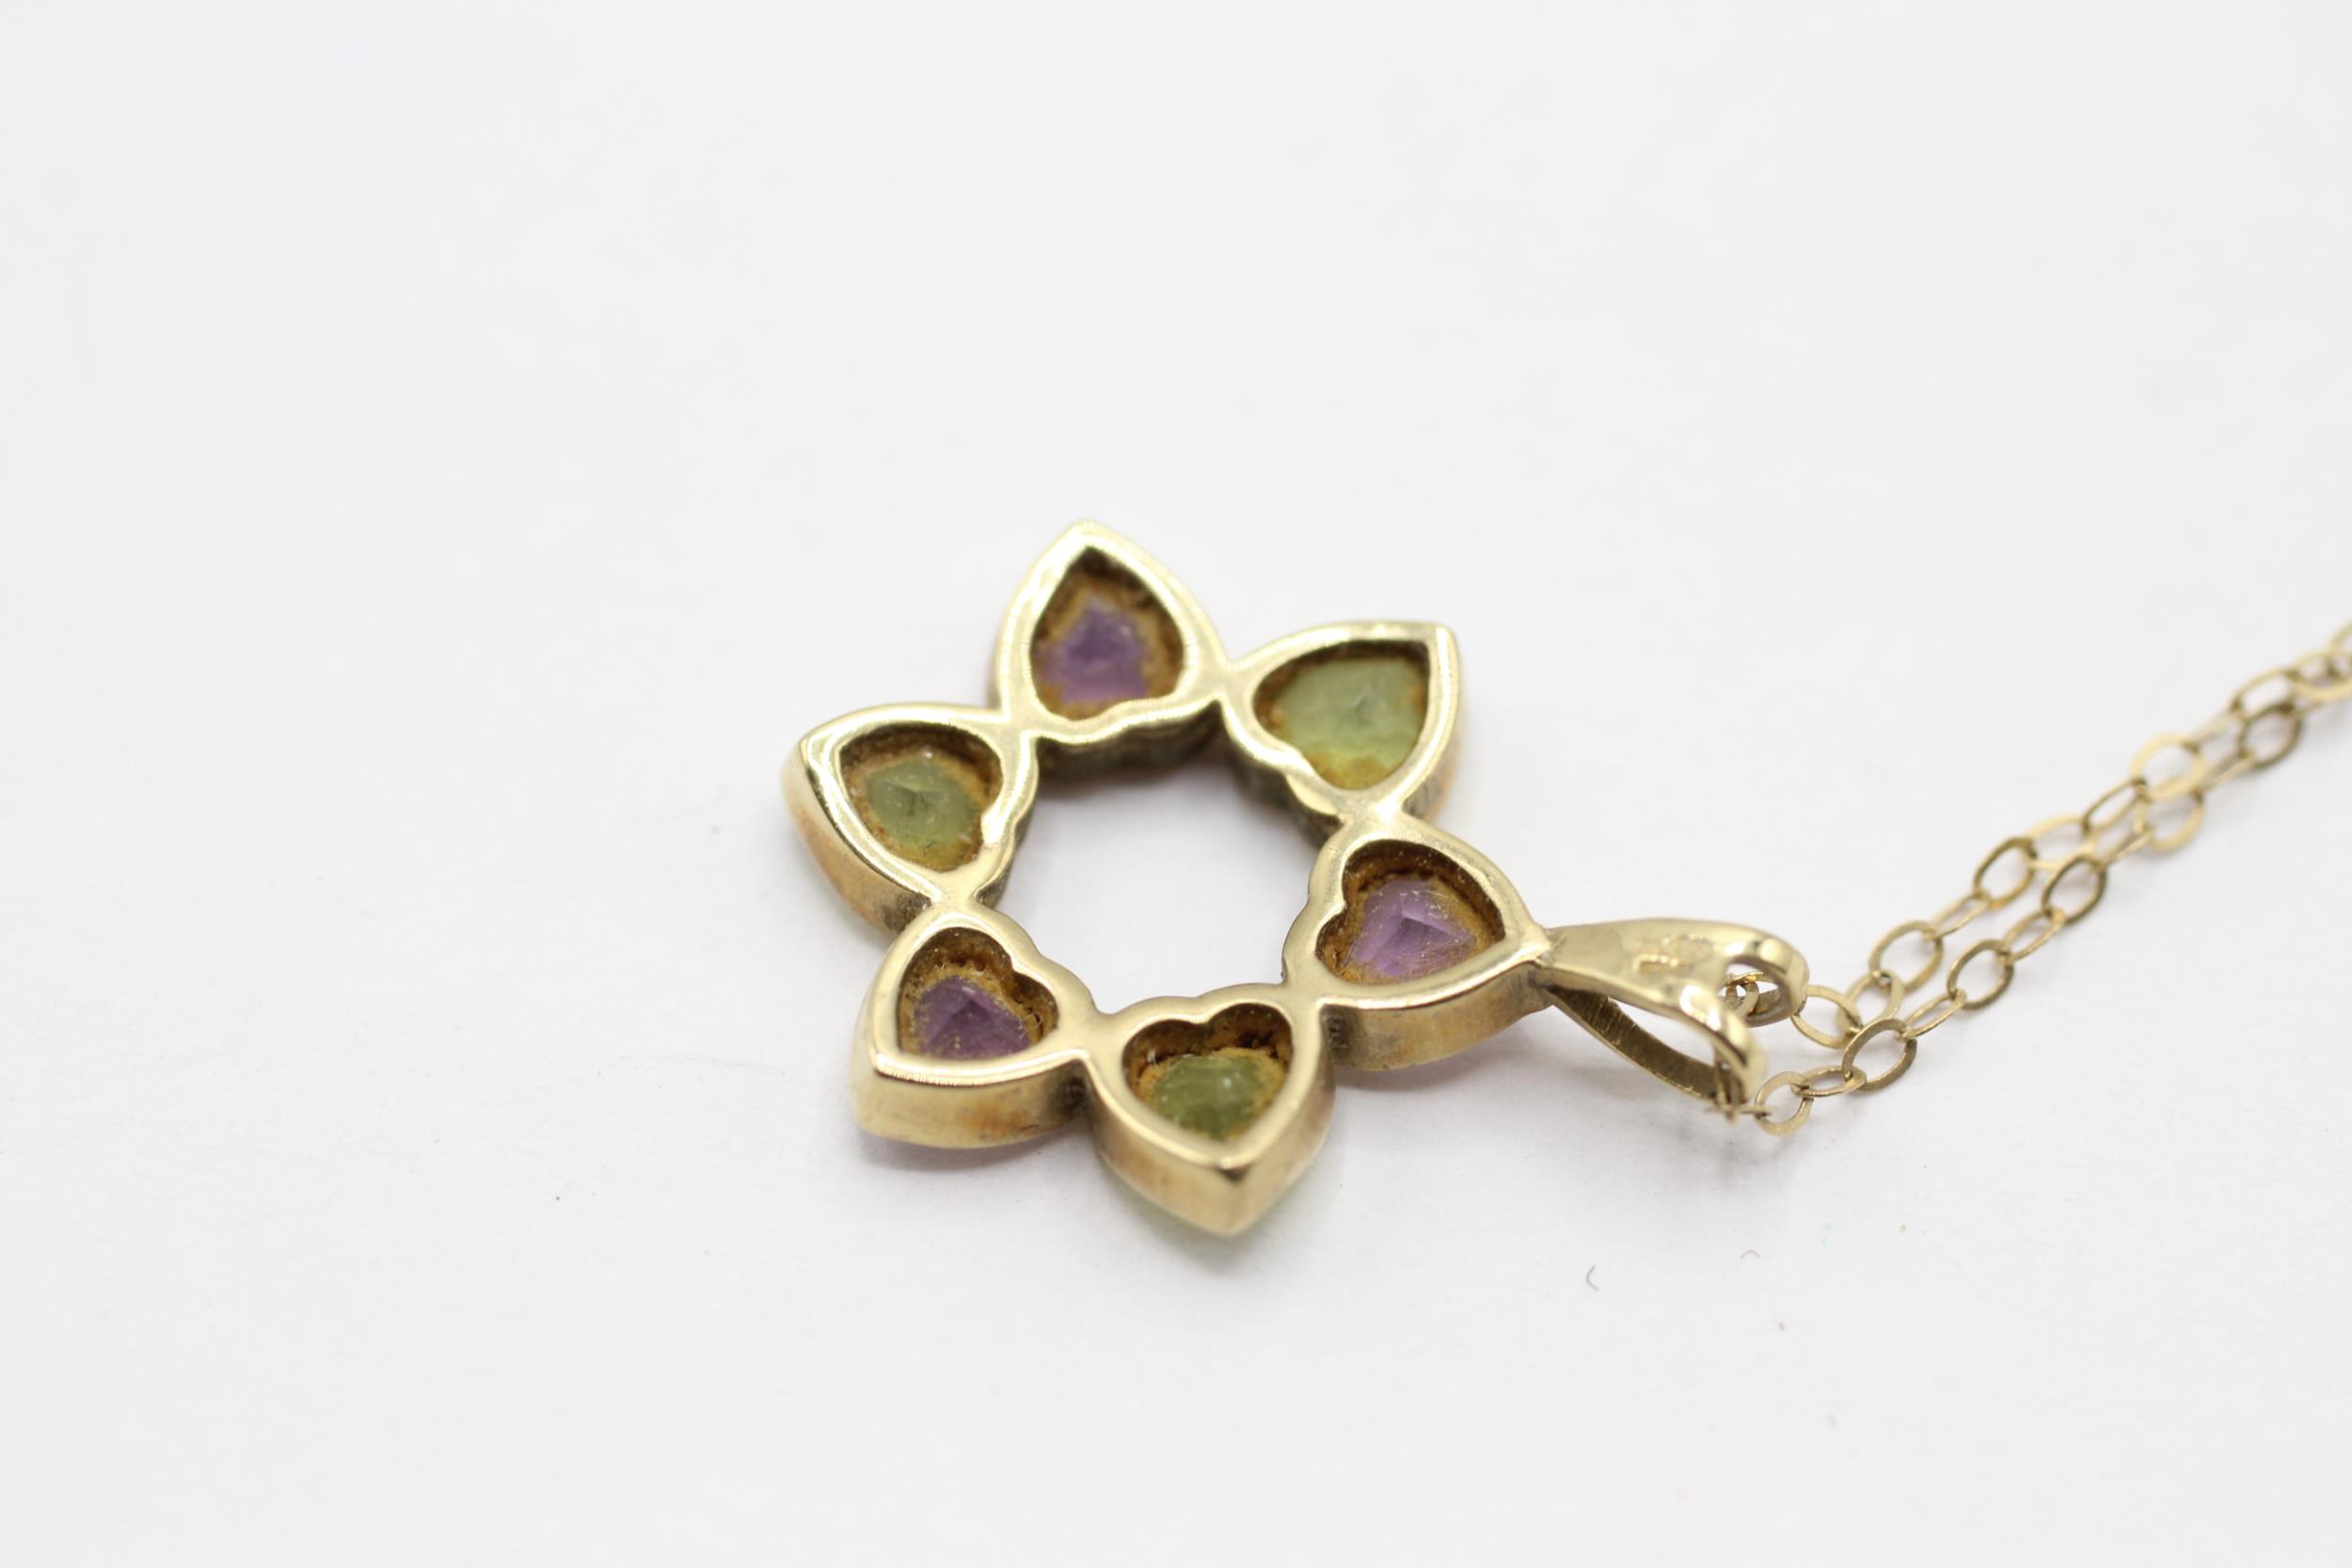 9ct gold heart-shaped peridot & amethyst floral cluster pendant - 2.1 g - Image 4 of 4